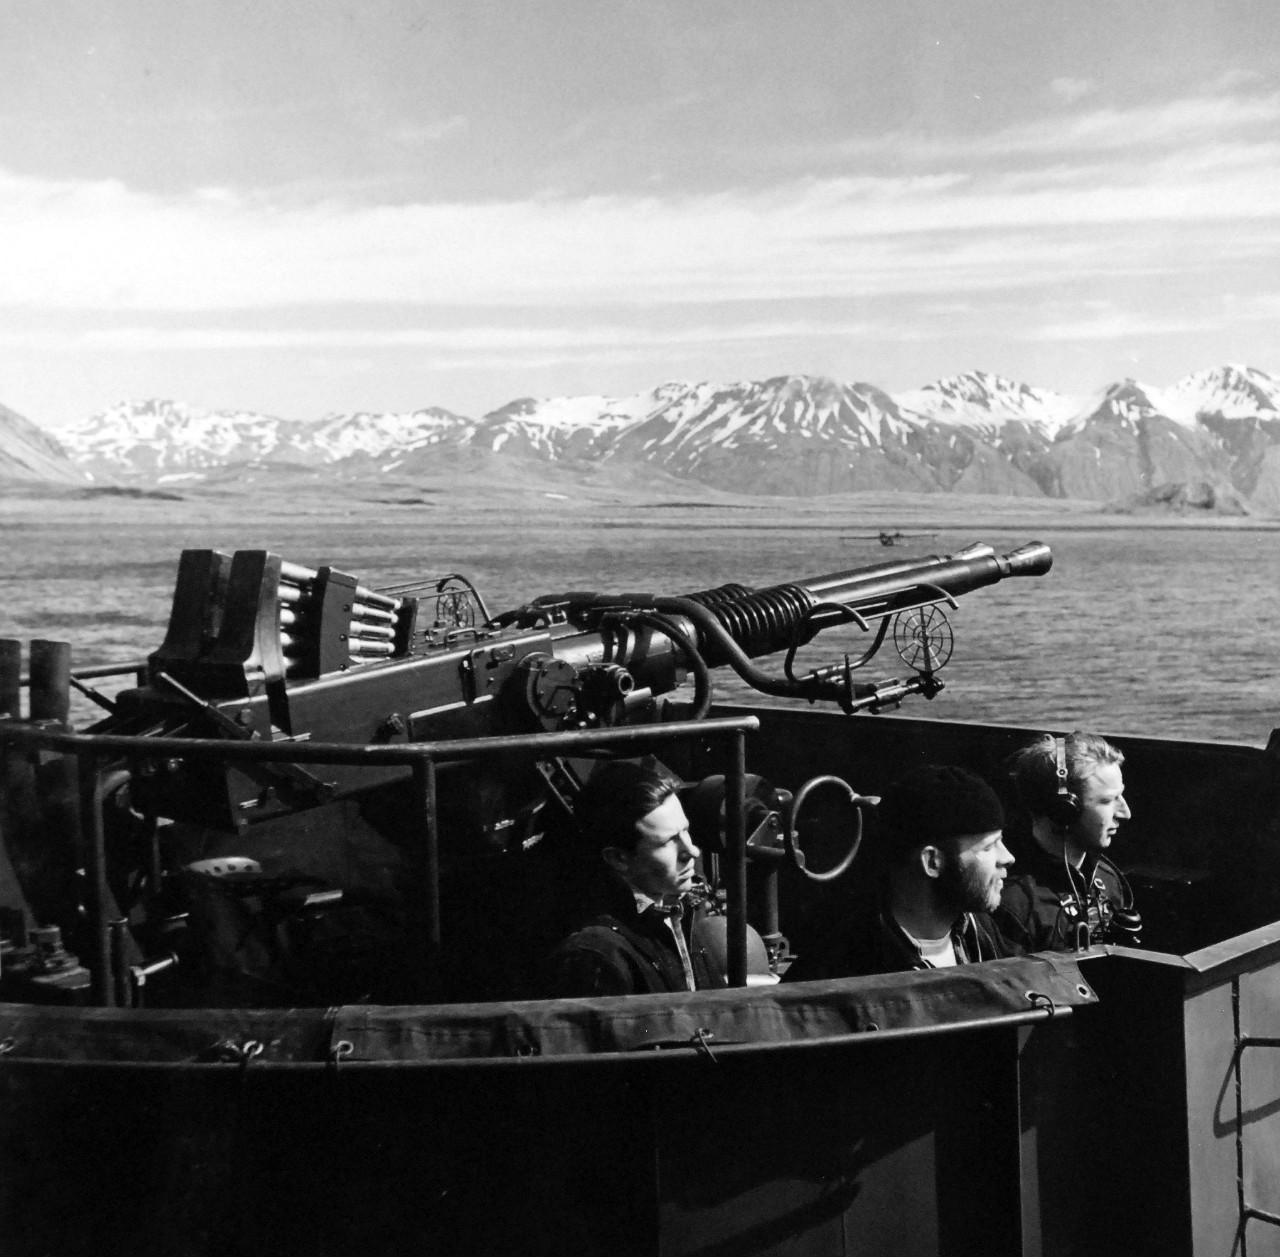 80-G-475686:  Aleutian Islands Campaign, June 1942 - August 1943.  Battle of Attu, May 11-29, 1943.  40mm gun and crew aboard USS Casco (AVP-12) anchored off Attu.  Photographed released by the Steichen Photographic Unit:  Lieutenant Commander Horace Bristol, July 1943.    TR-5274.    U.S. Navy photograph, now in the collections of the National Archives.  (2015/11/17).